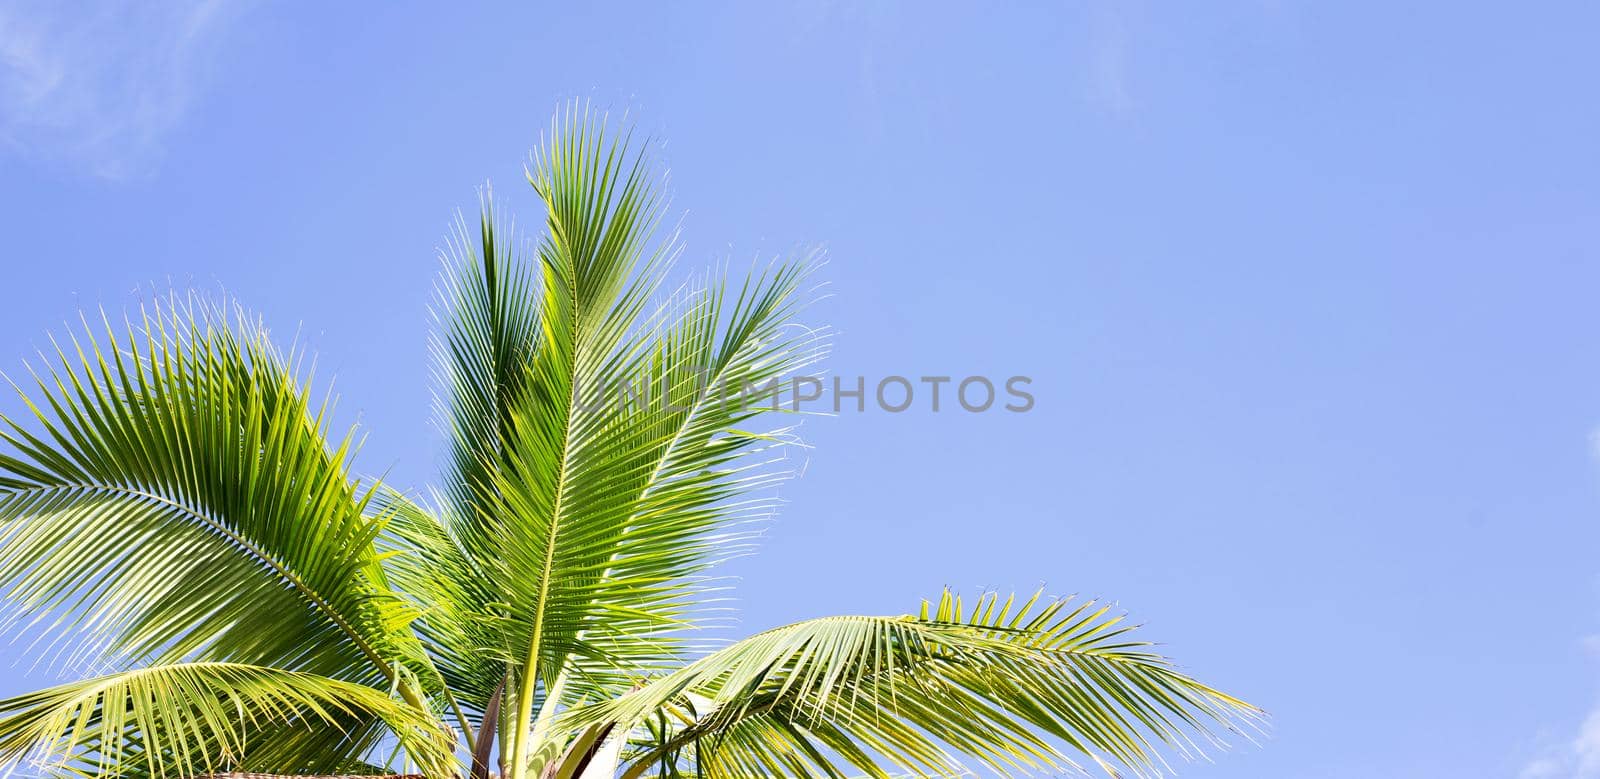 Coconut palm trees, beautiful tropical with sky and clouds.